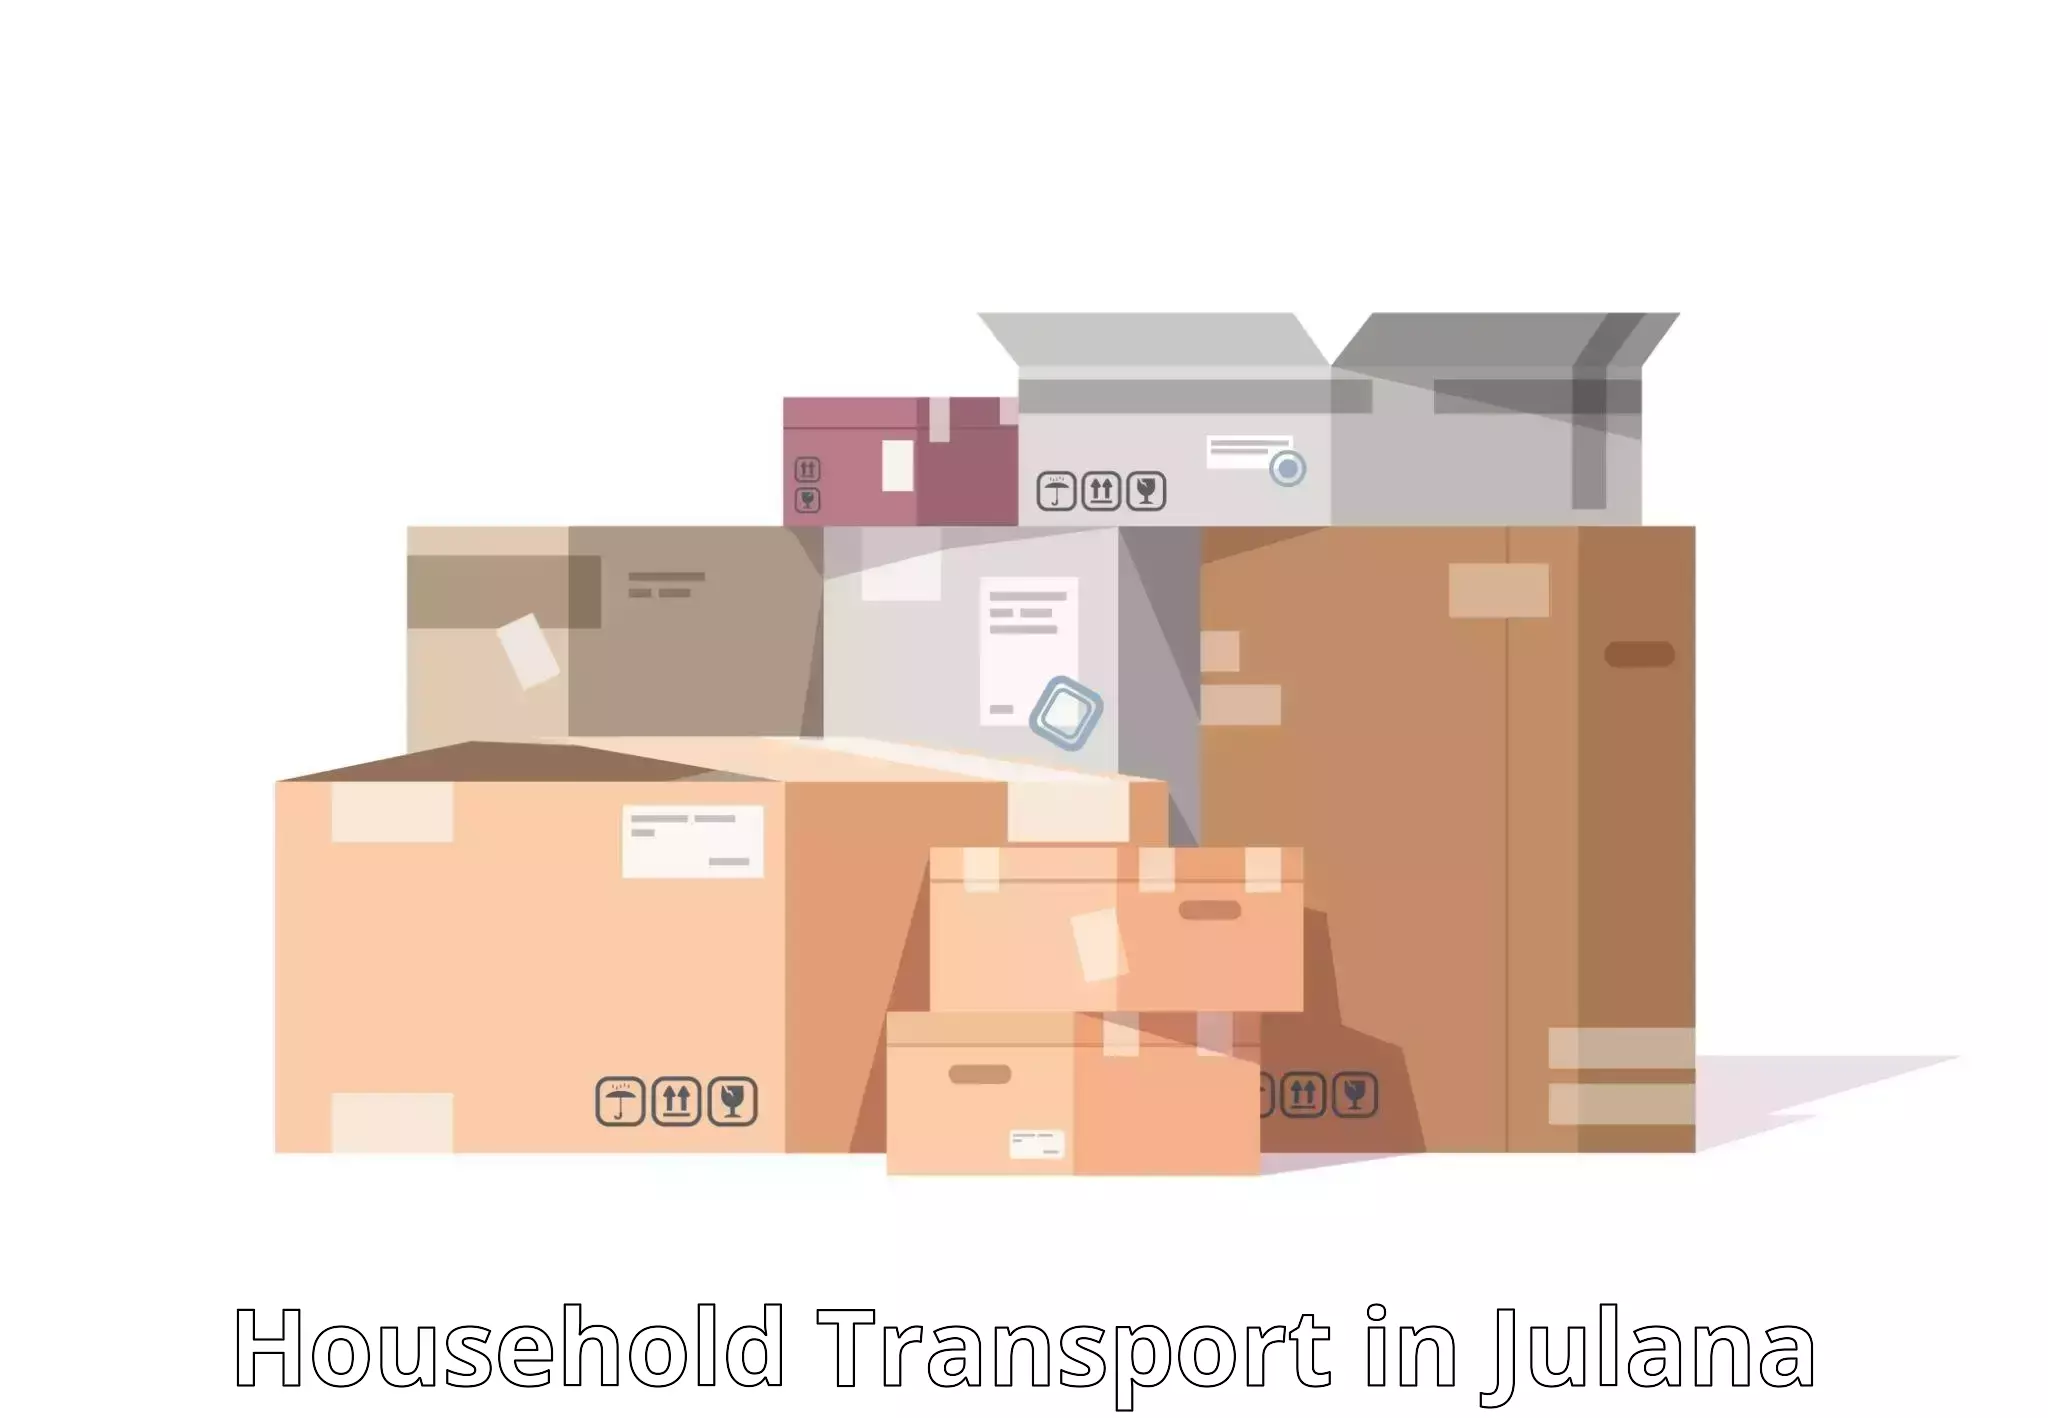 Specialized household transport in Julana